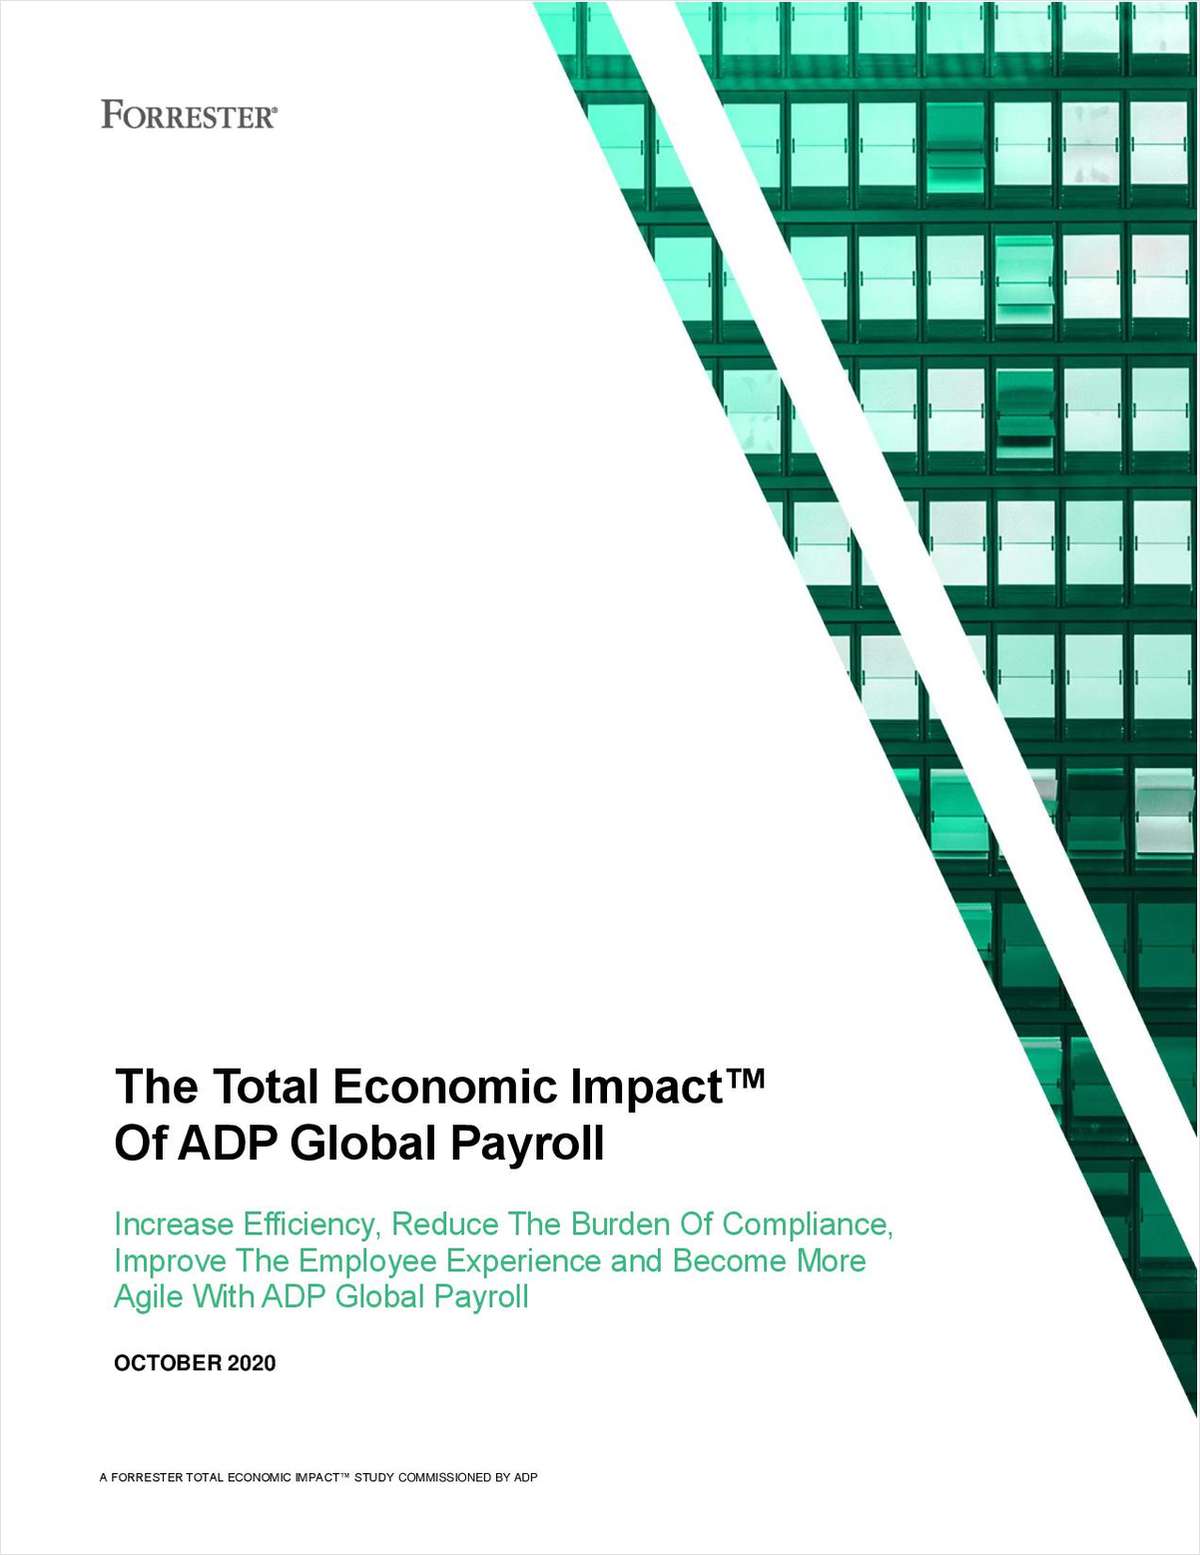 The Total Economic Impact™ Of ADP Global Payroll